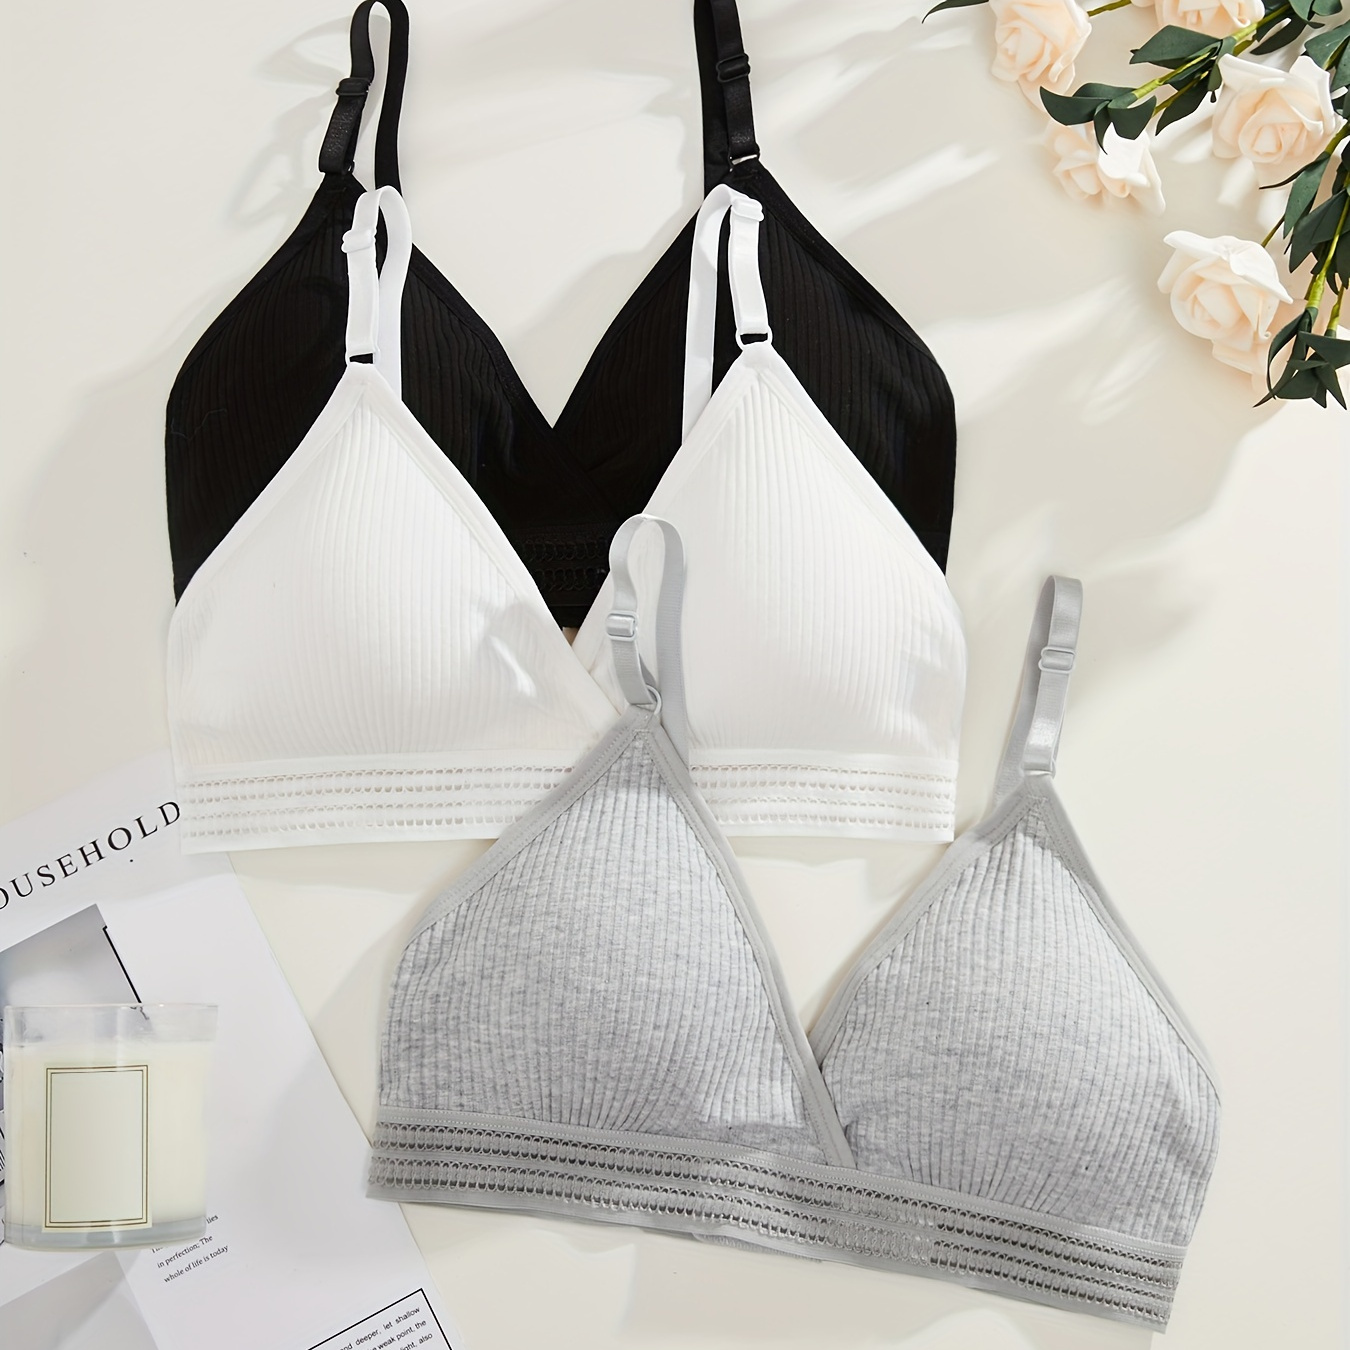 

3-pack Women's Triangle Cup Bras, Removable Pads, Wireless, Comfortable, Casual Style, Adjustable Straps - Black/white/grey